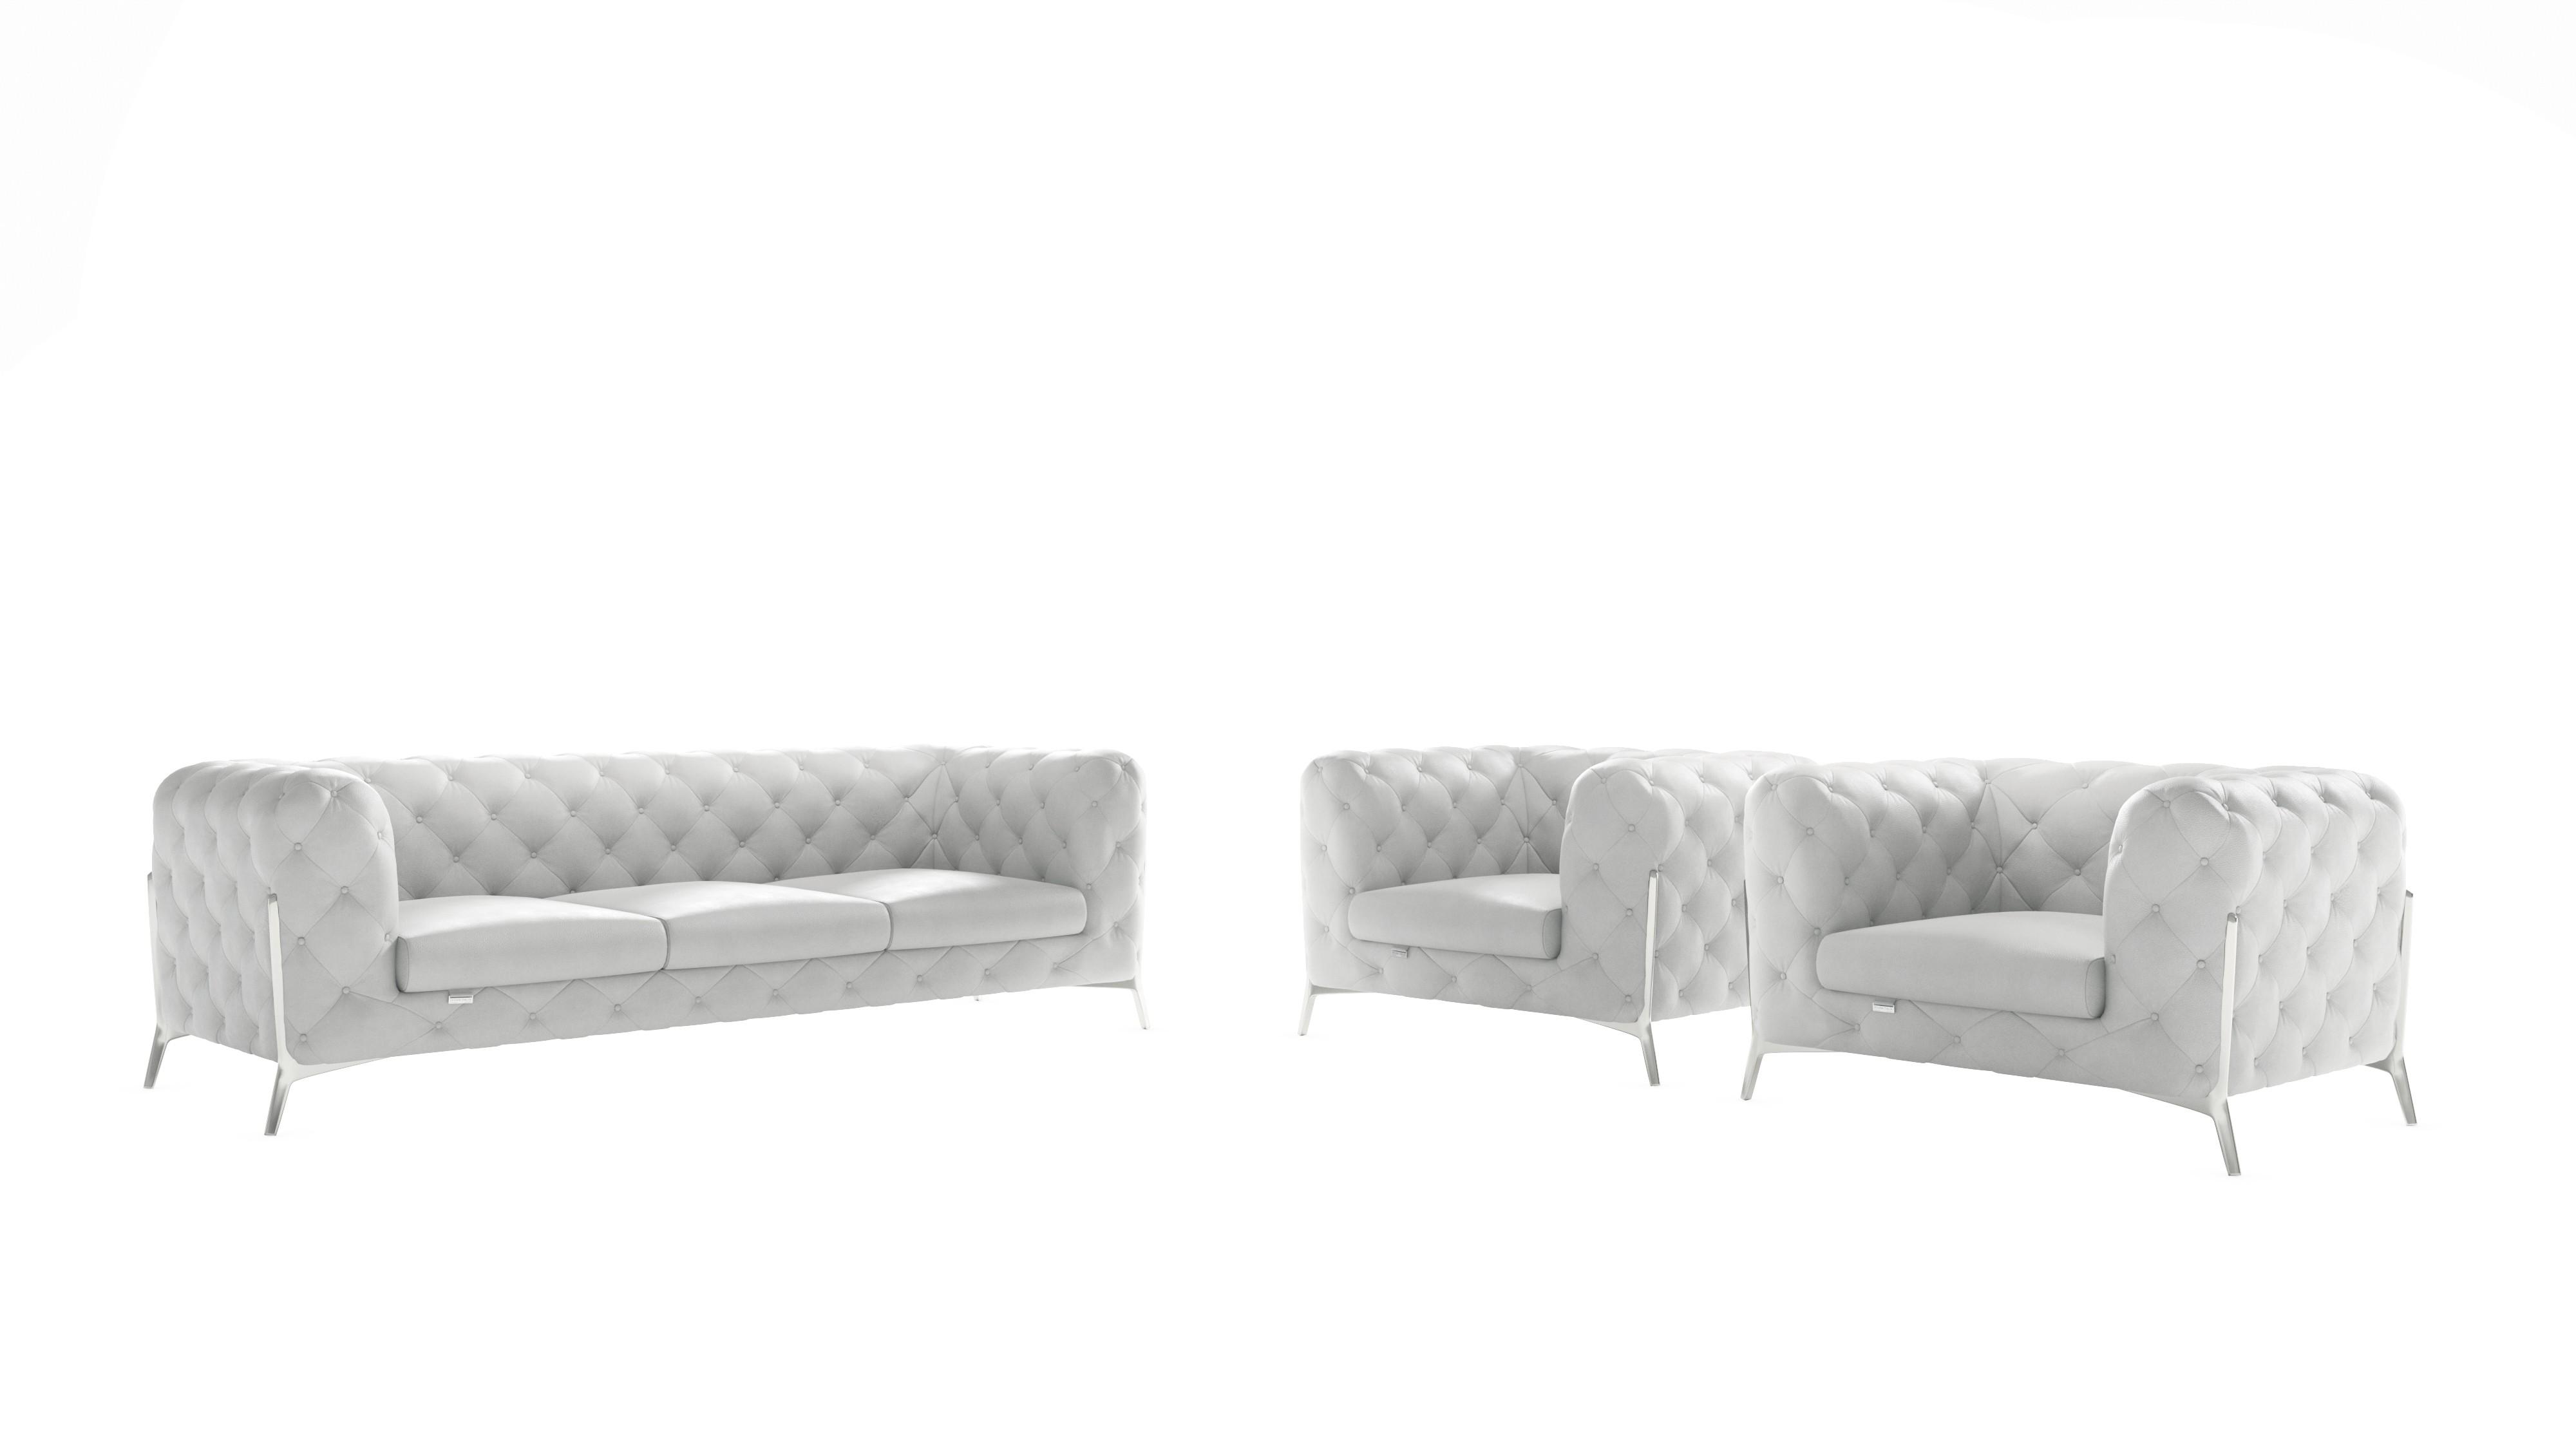 Contemporary Sofa and 2 Chairs 970 970-WHITE-2CH-SET in White Top grain leather